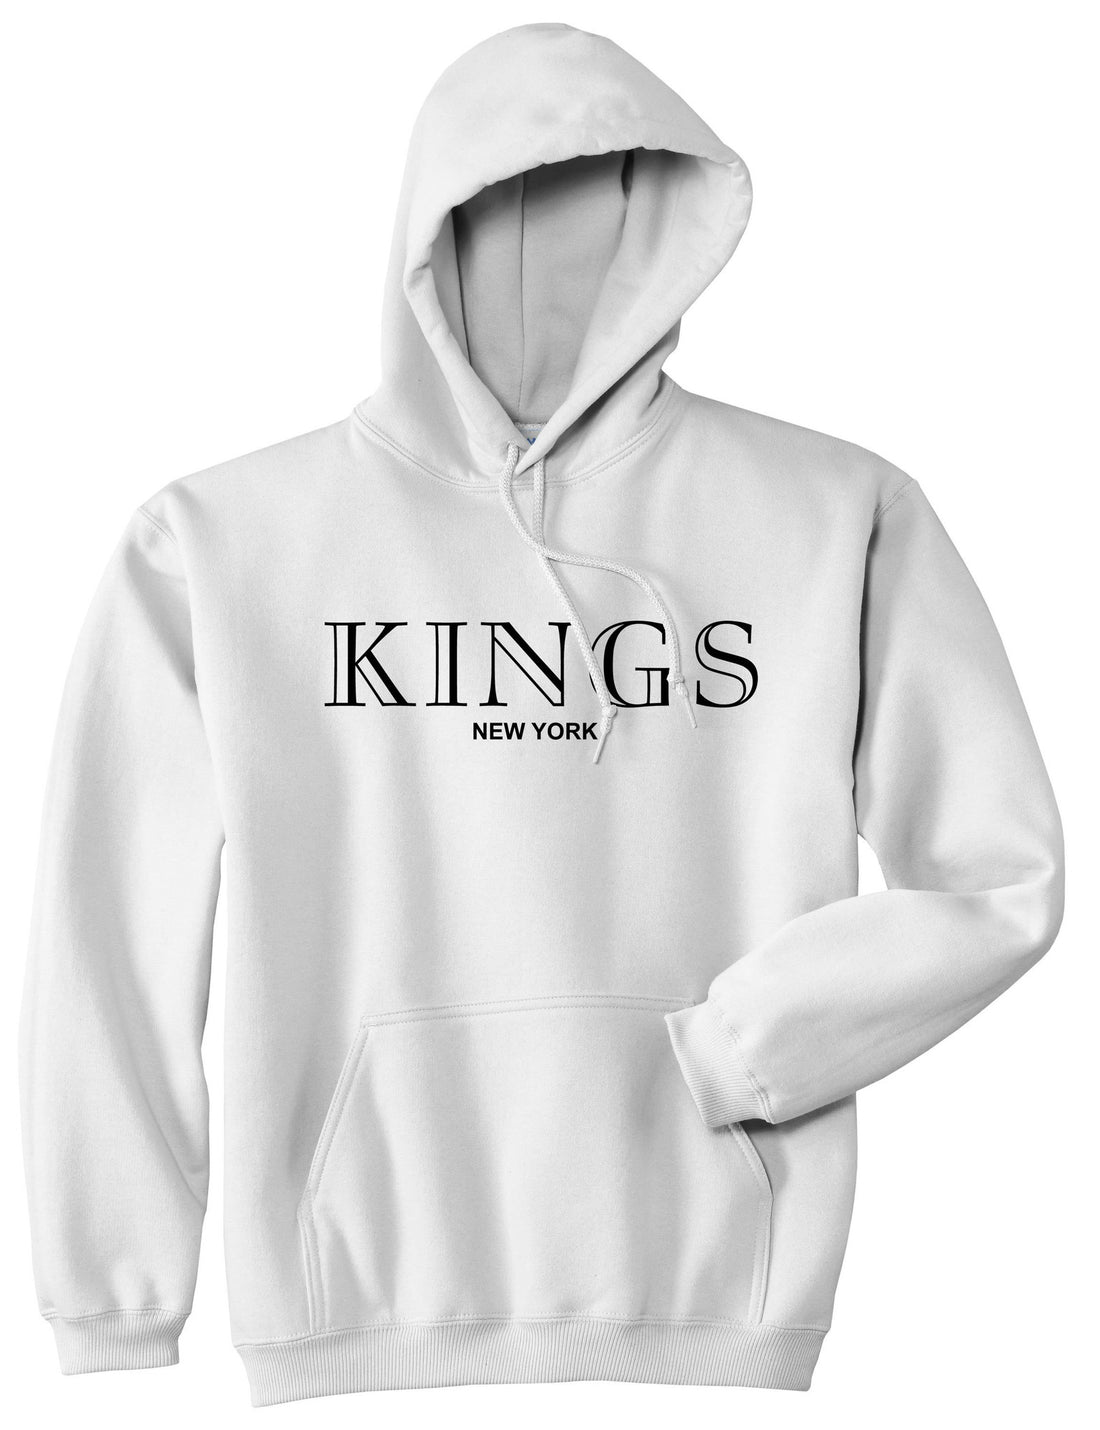 KINGS New York Fashion Pullover Hoodie Hoody in White